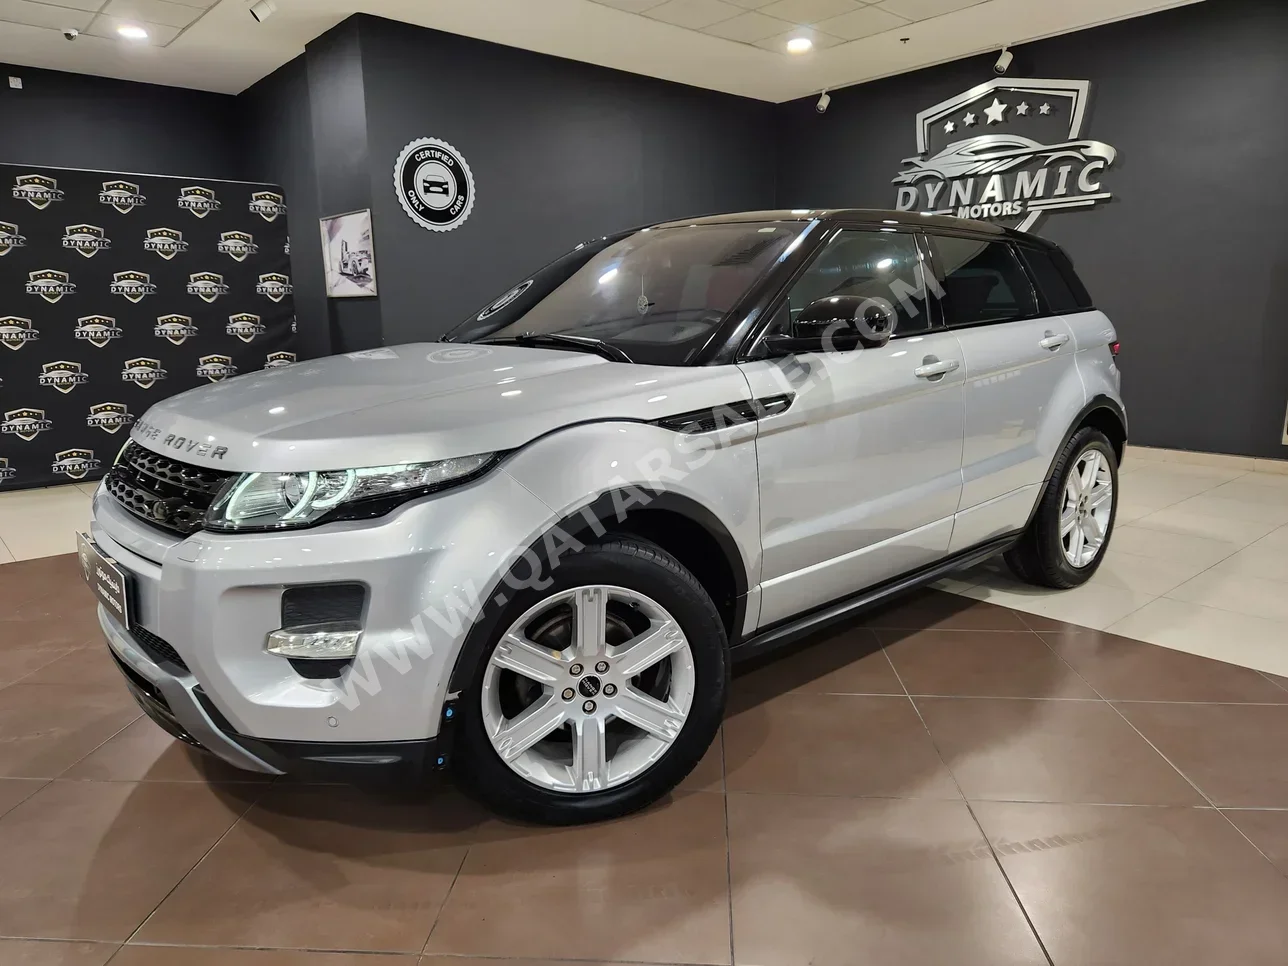 Land Rover  Evoque  Dynamic  2015  Automatic  73٬000 Km  4 Cylinder  Four Wheel Drive (4WD)  SUV  Silver